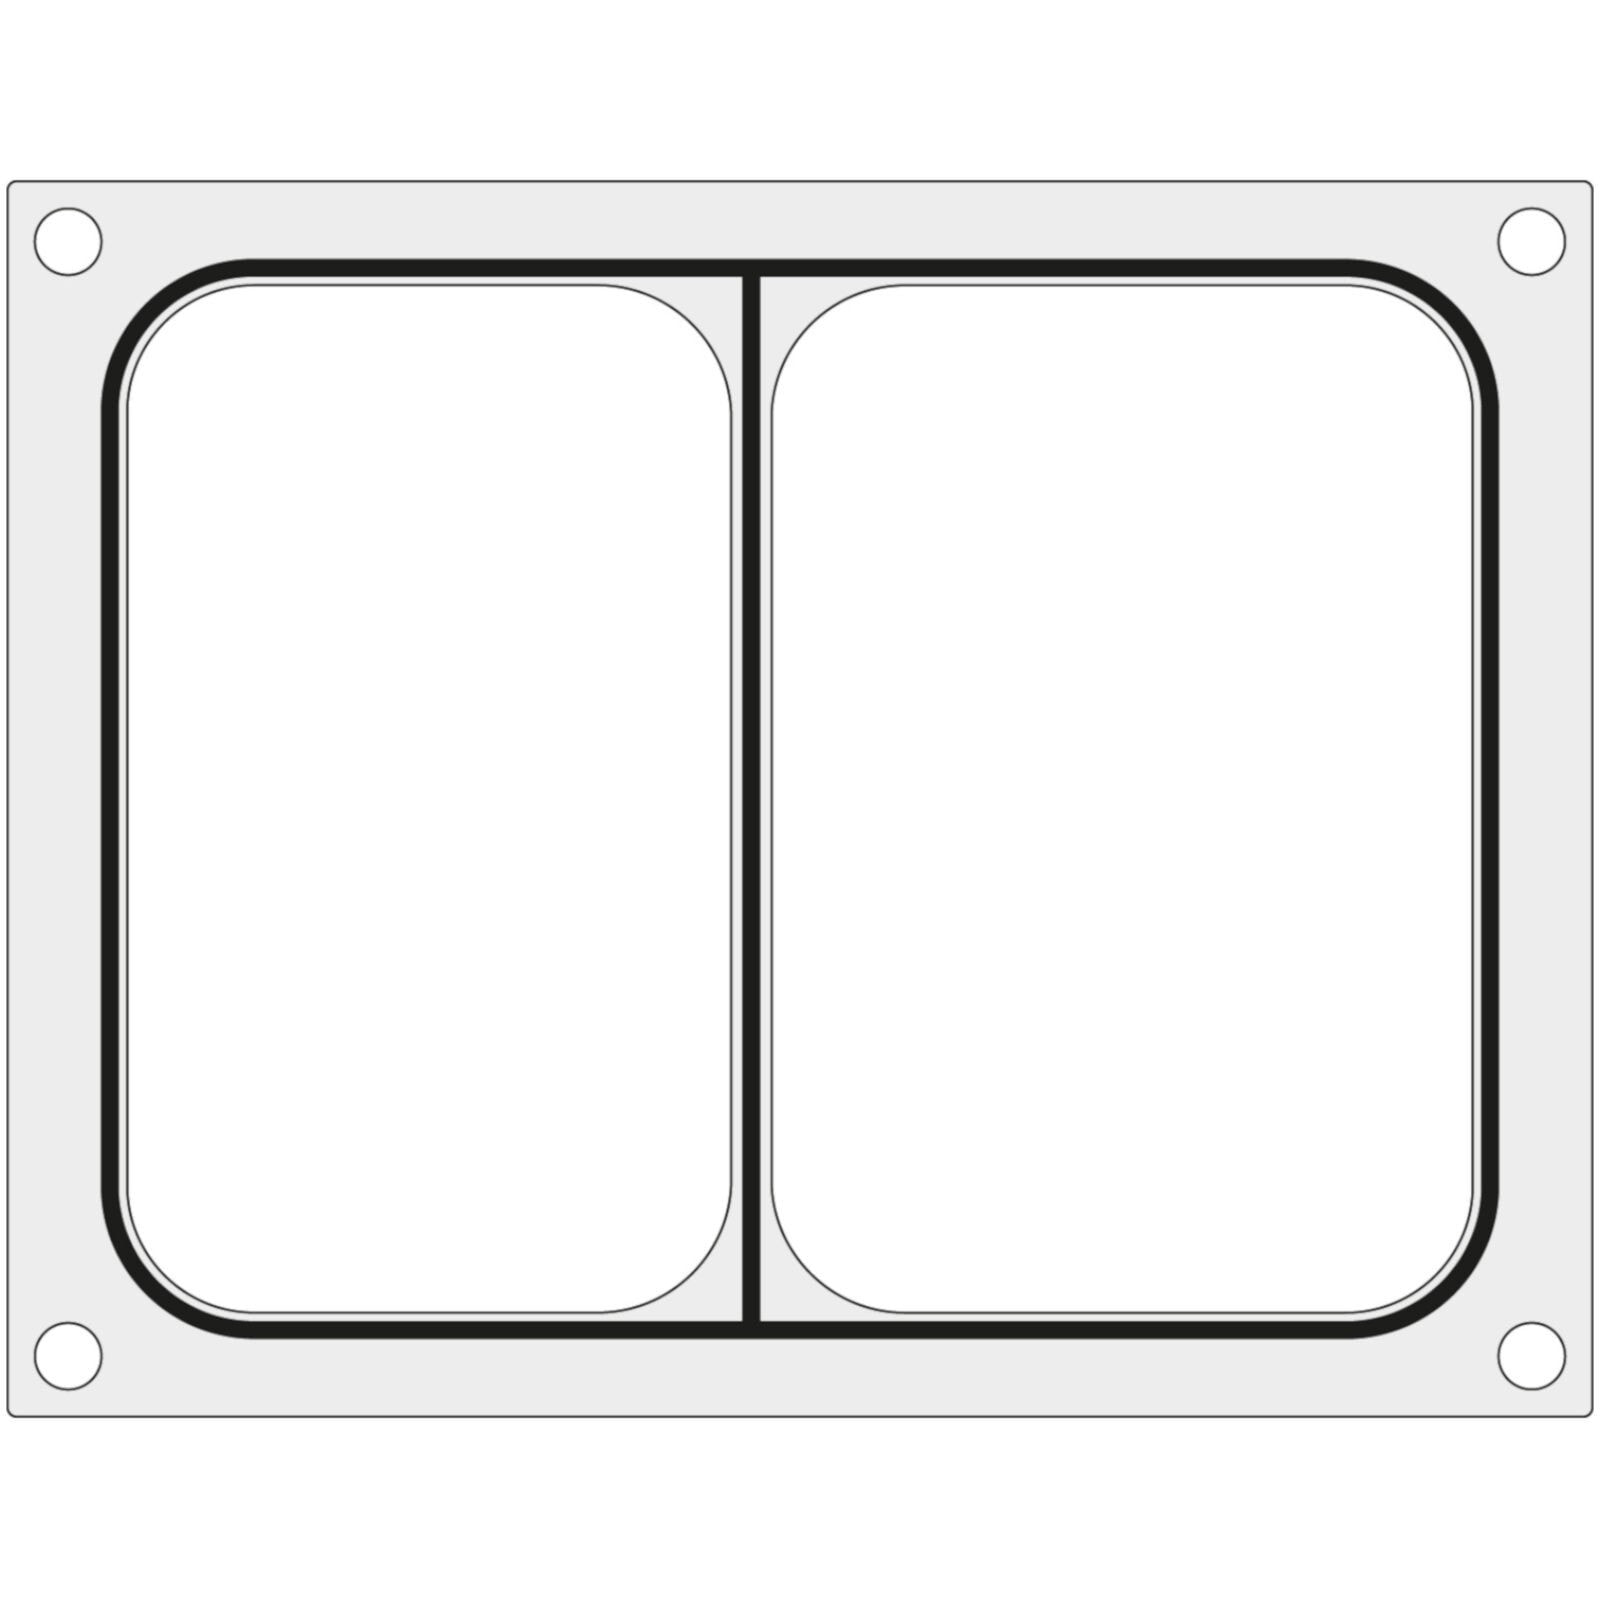 Mat matrix for MCS welding machines for a two-sectioned tray 227x178 mm - Hendi 805466